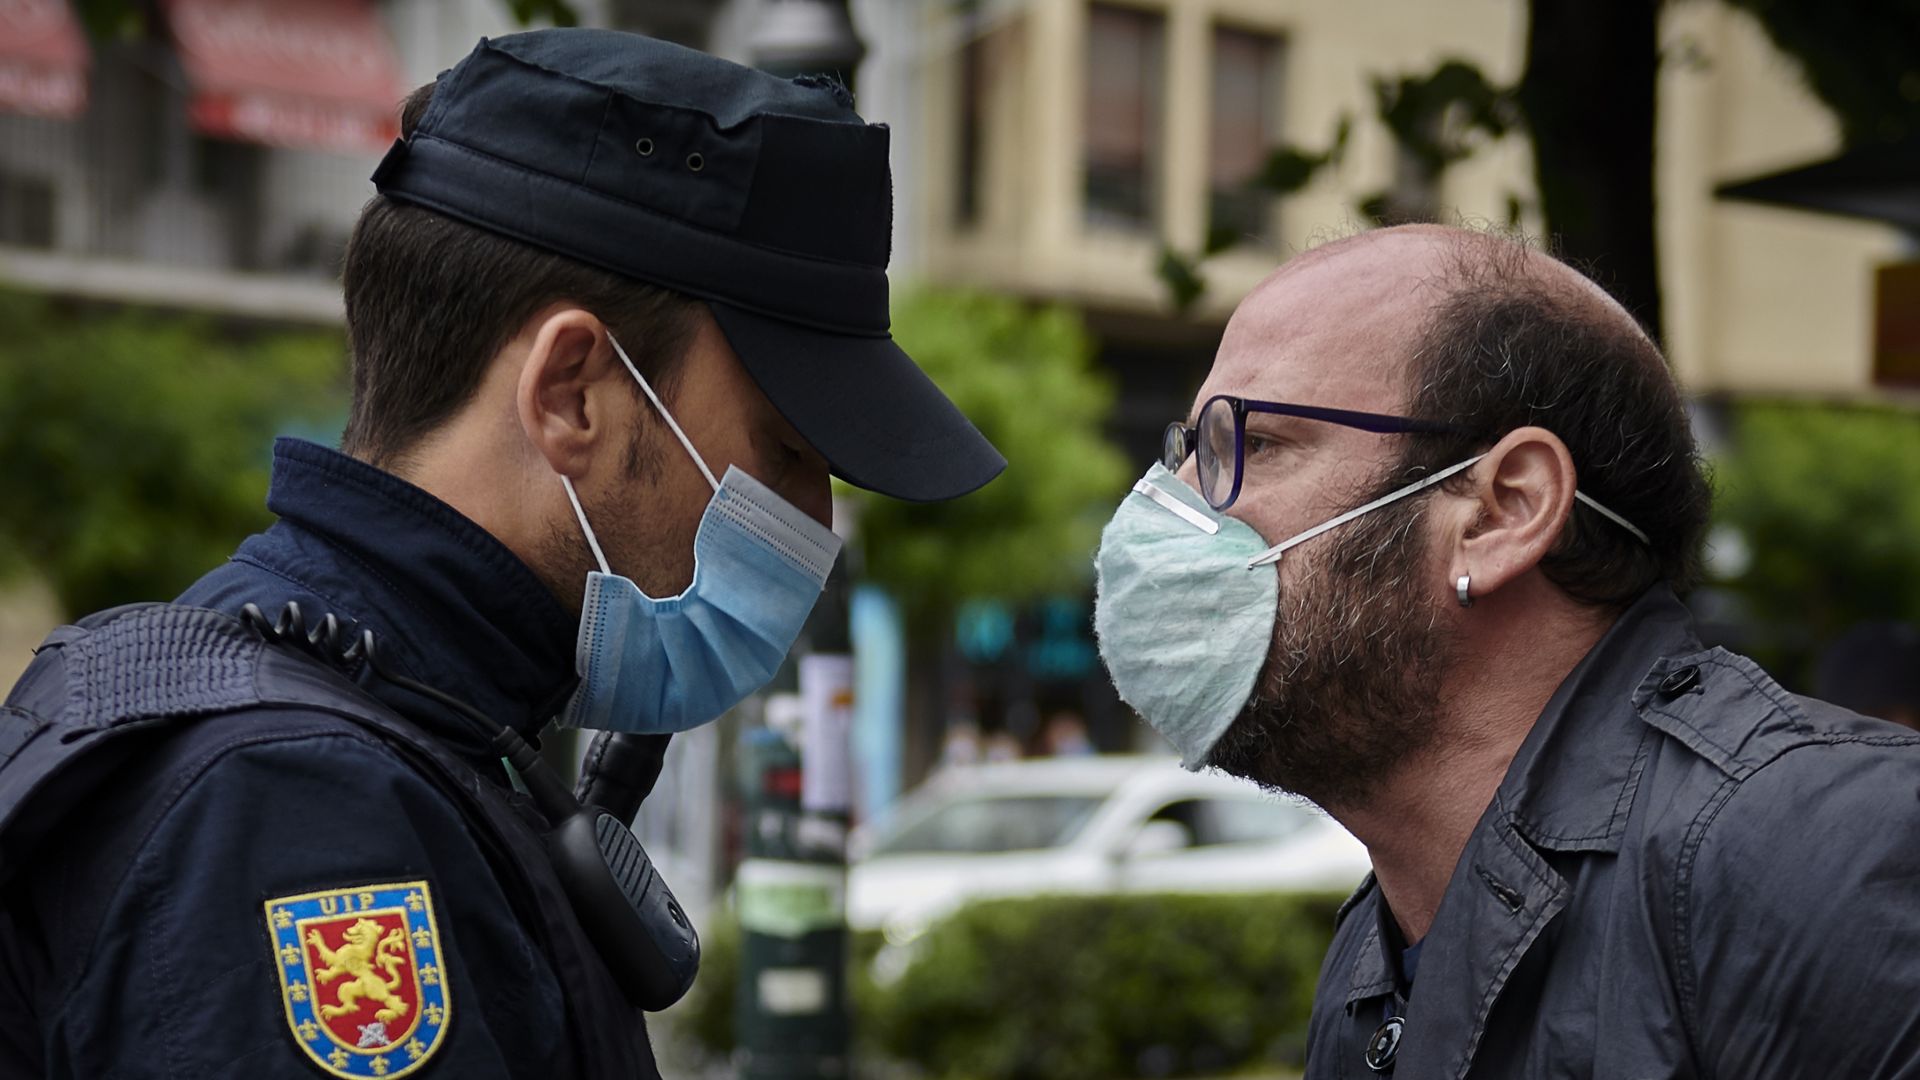 In this image, a masked man confronts a masked police officer